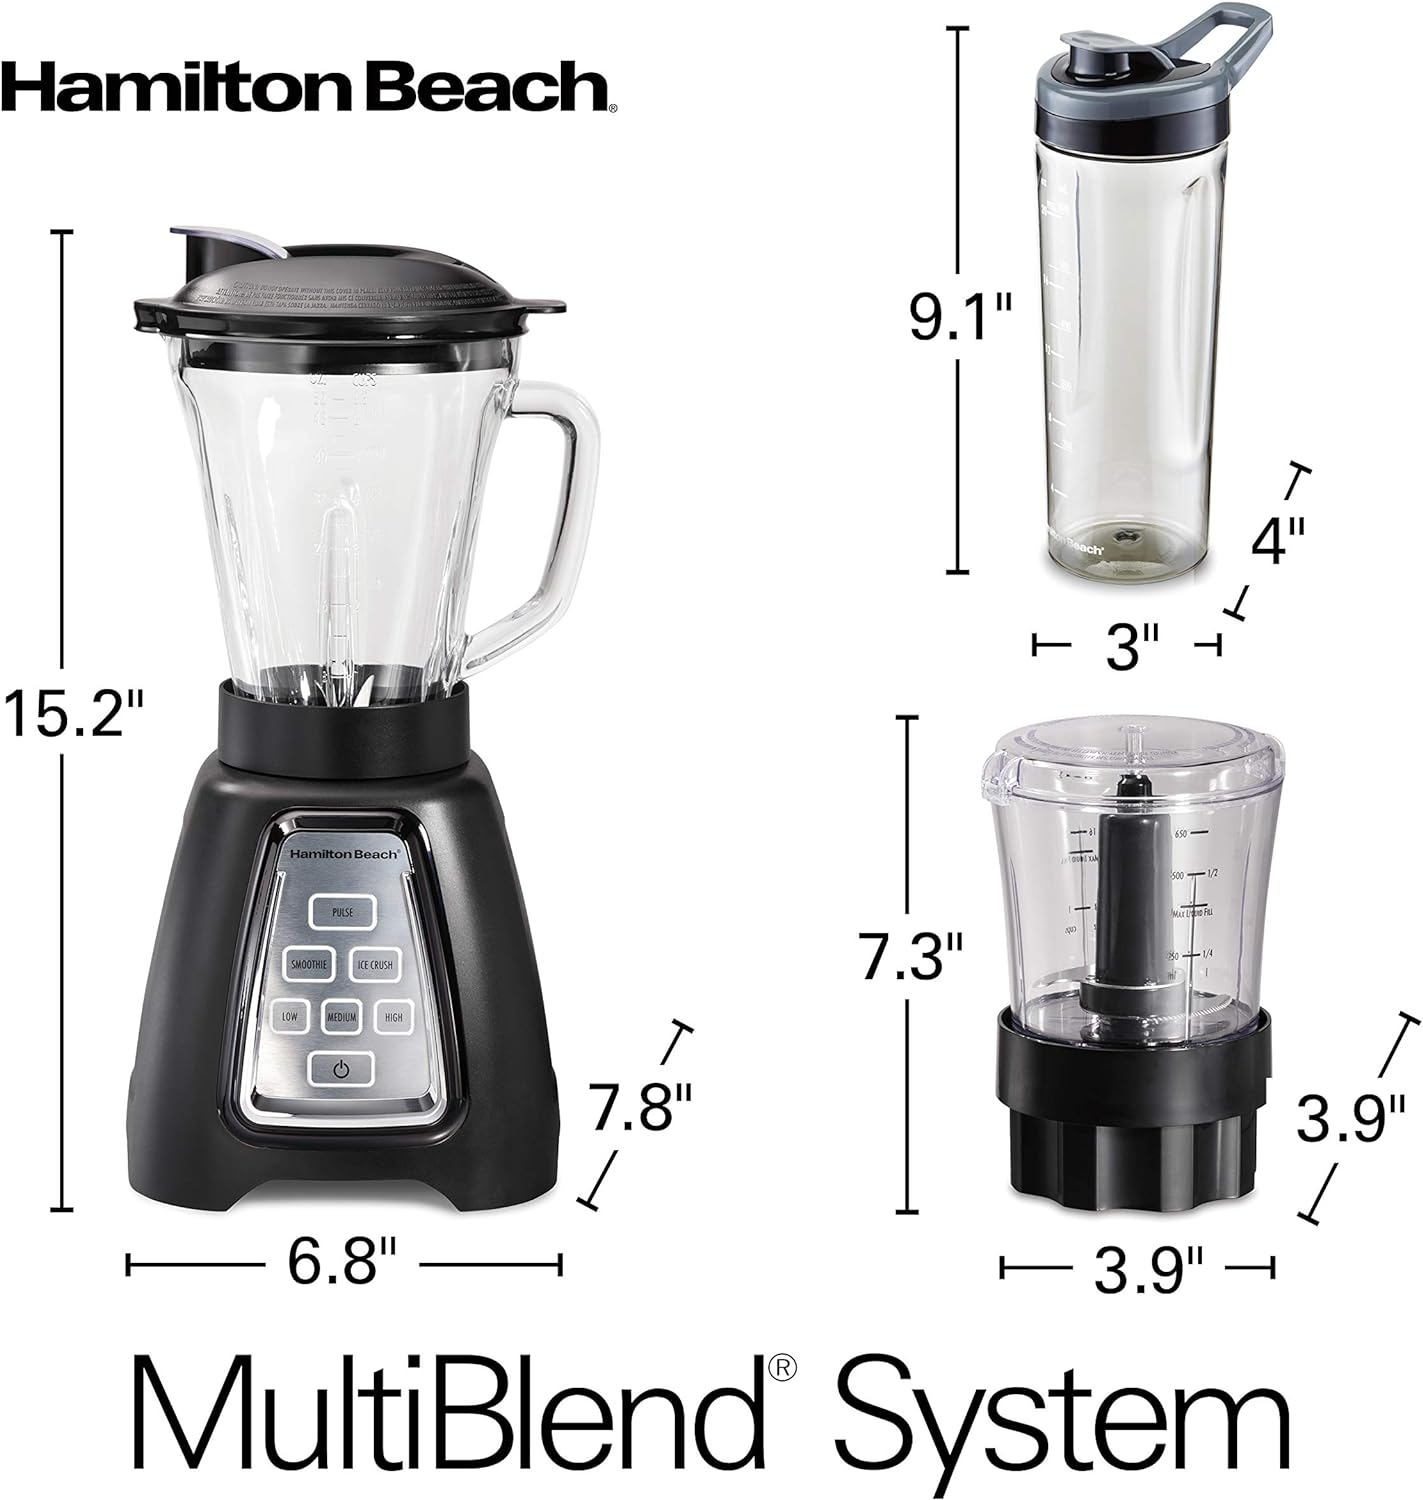 Hamilton Beach Blender and Food Processor Combo With Auto Programs For Smoothie and Ice Crush, Blend-In Portable Travel Cup, 52oz Glass Jar & 3 Cup Food Chopper, 950 Watts, Black (58242)